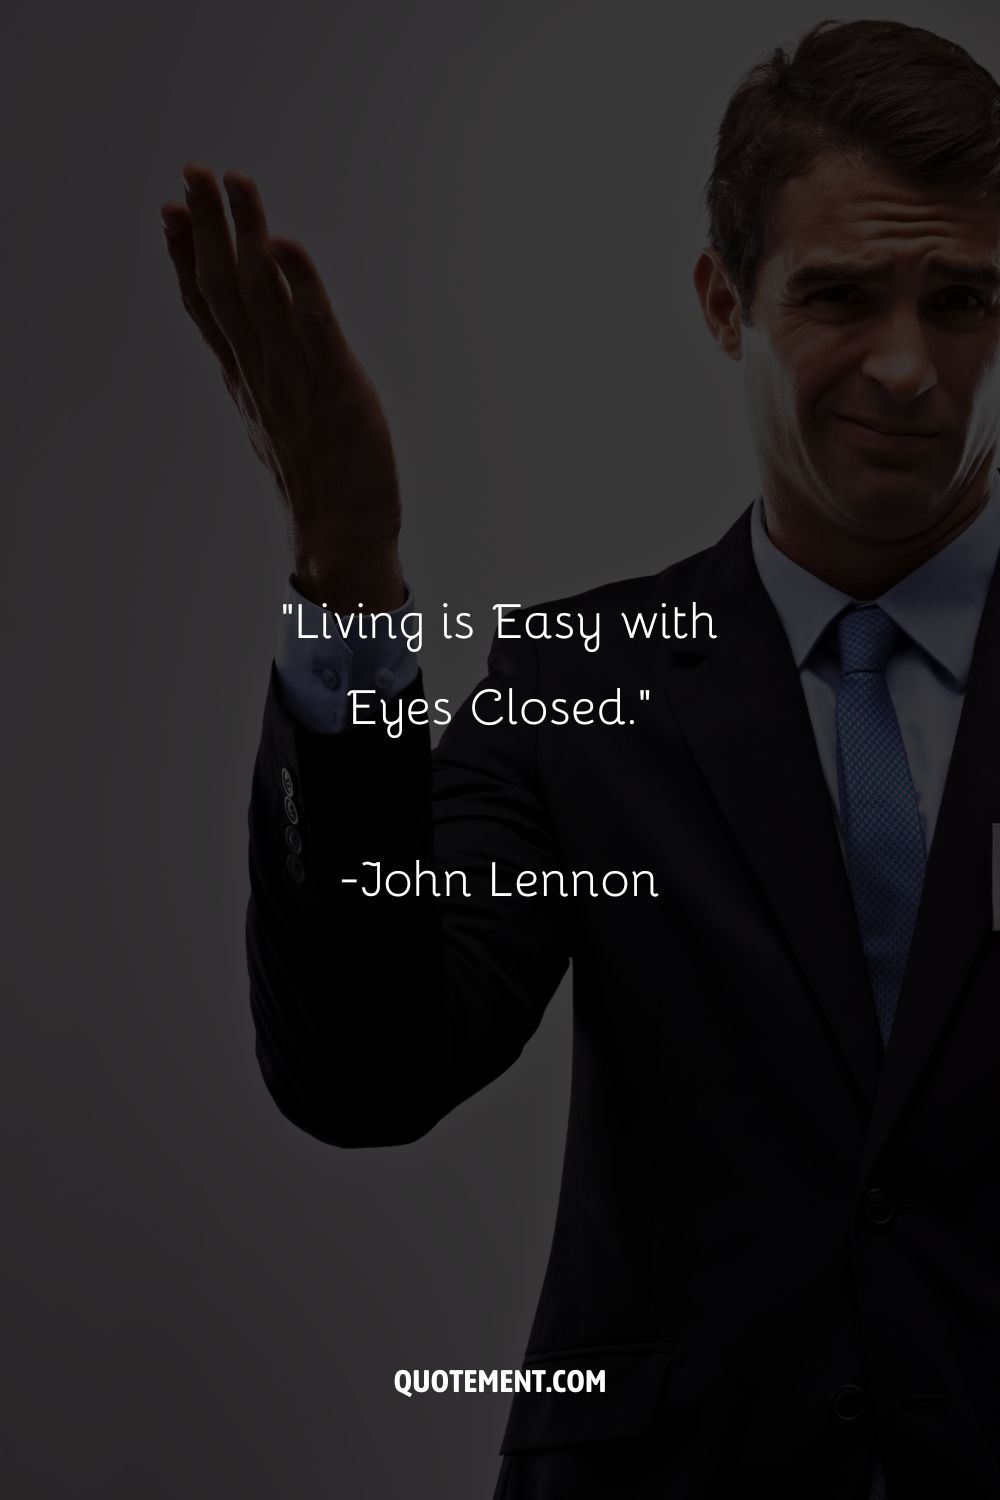 “Living is Easy with Eyes Closed.”